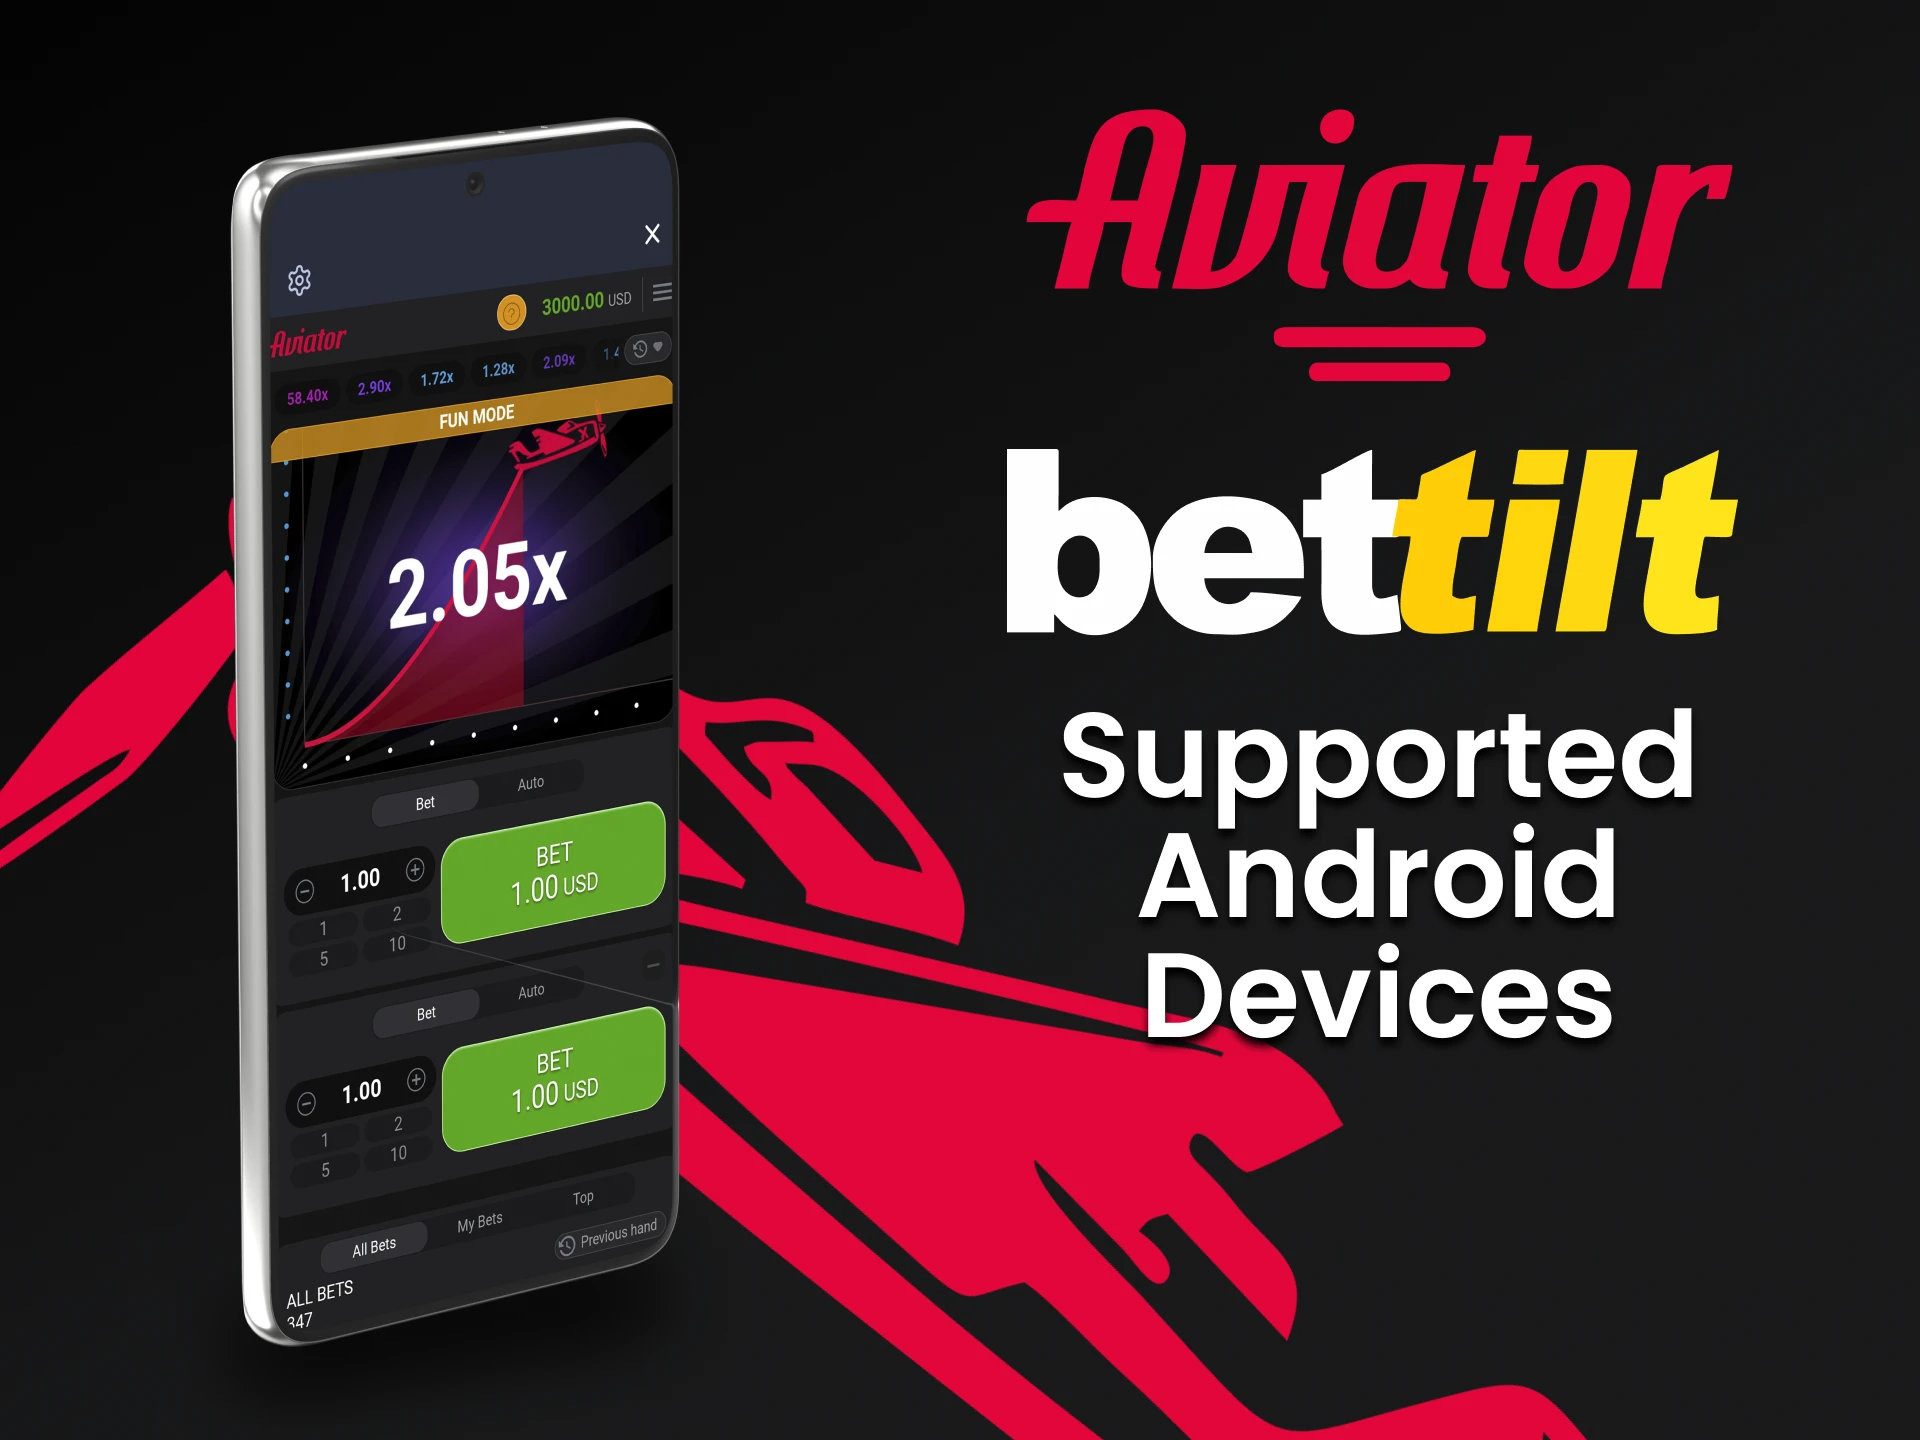 Use your Android device to play Aviator on Bettilt.